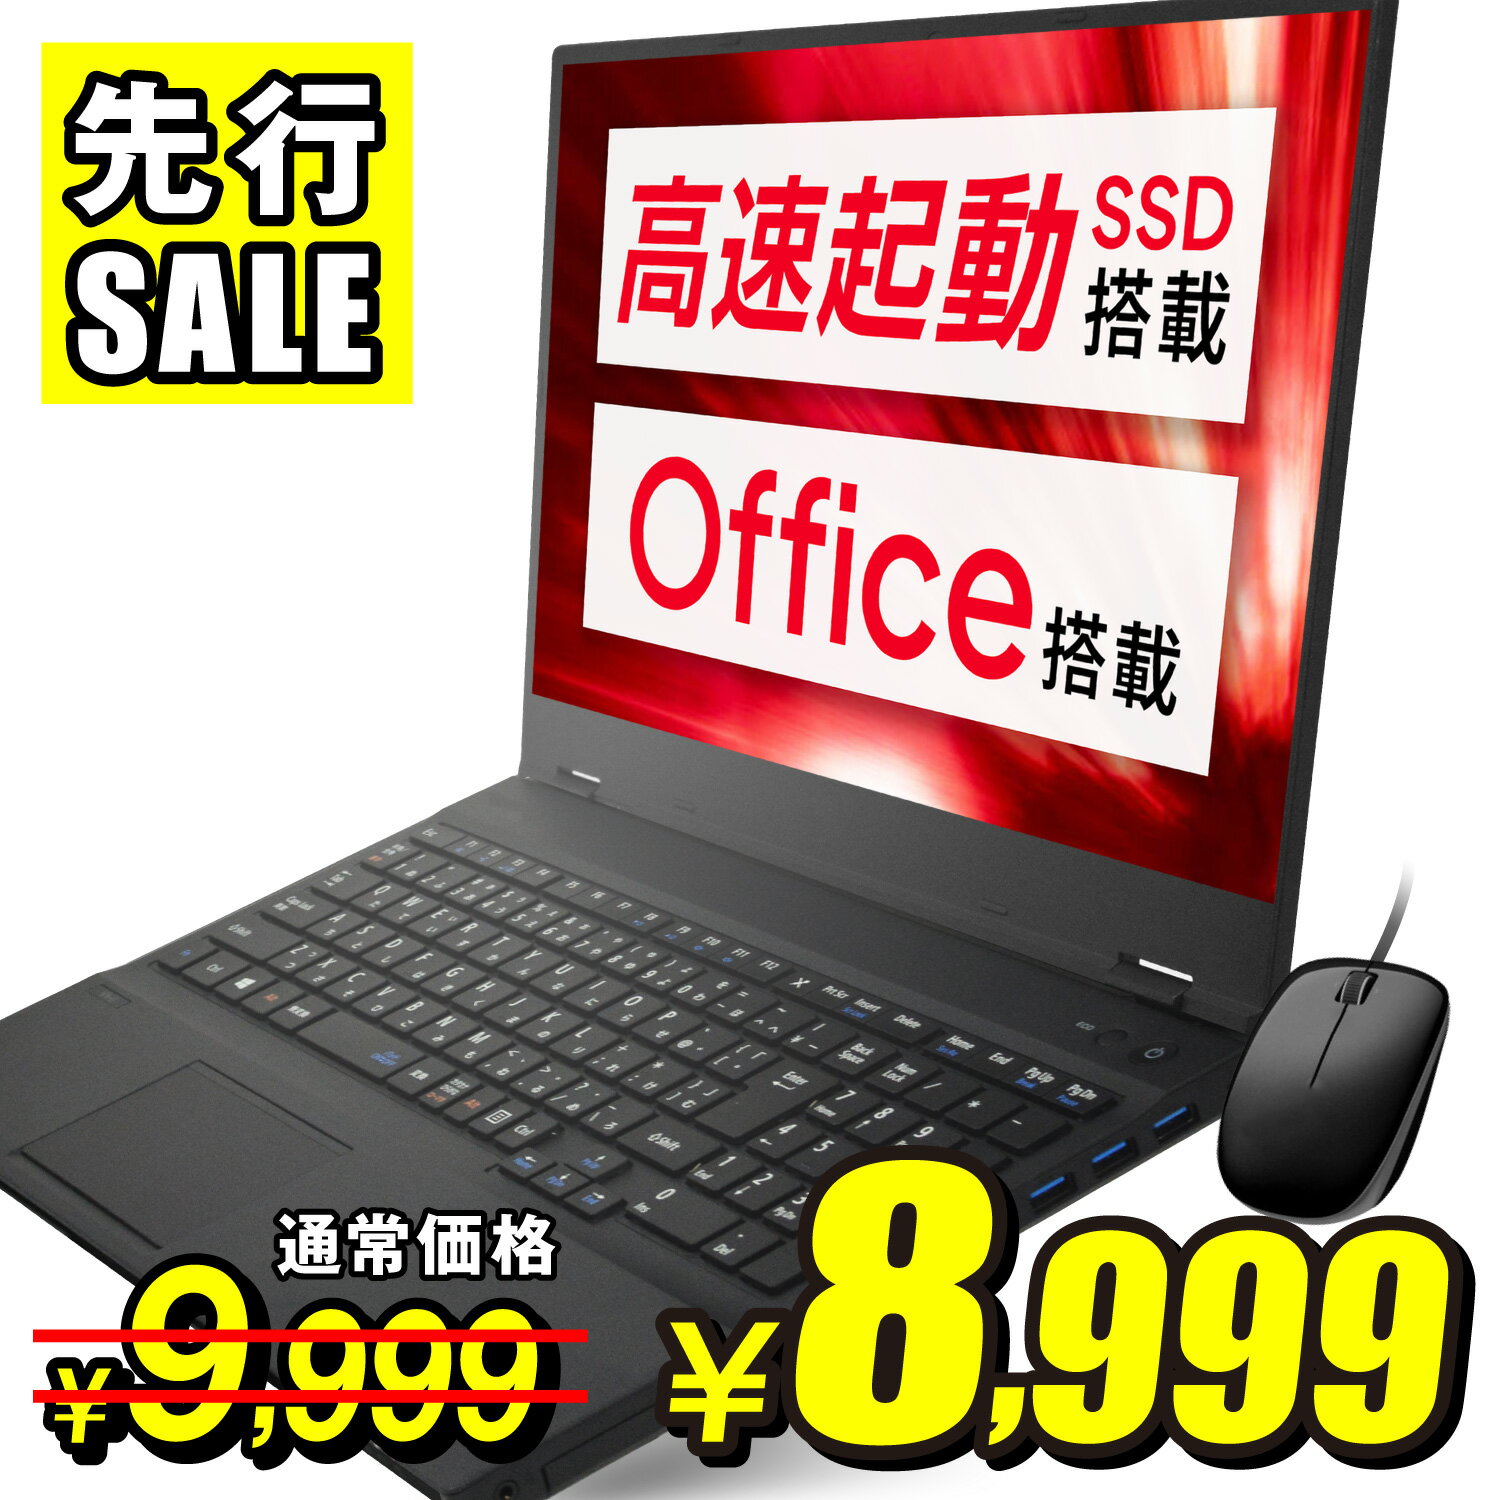 Dynabook G83/KV13.3型 Core i5-1240P 256GB(SSD) Office付 A6GNKVF8D635 1台[21]